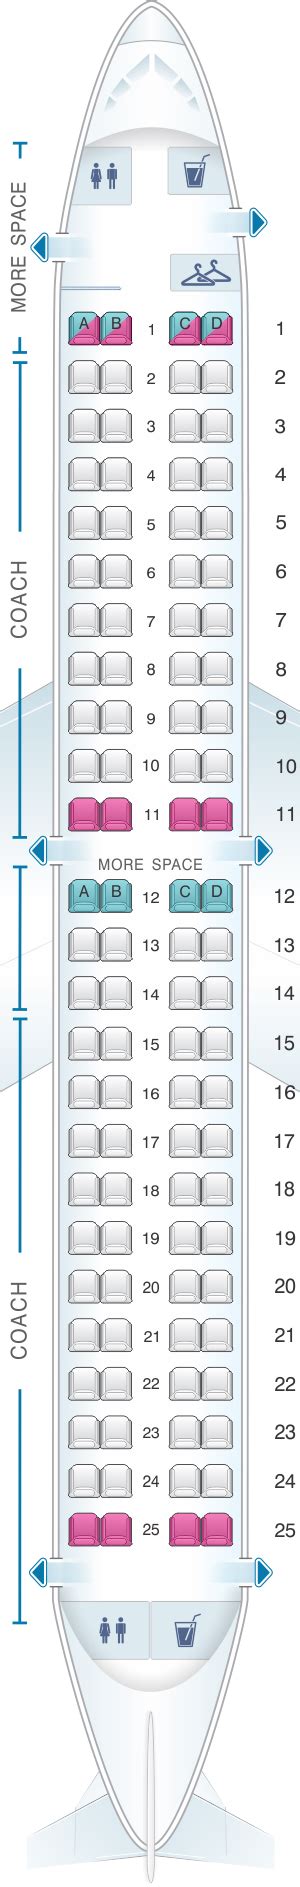 JetBlue Seat Maps. Overview; Planes & Seat Maps. Airbu